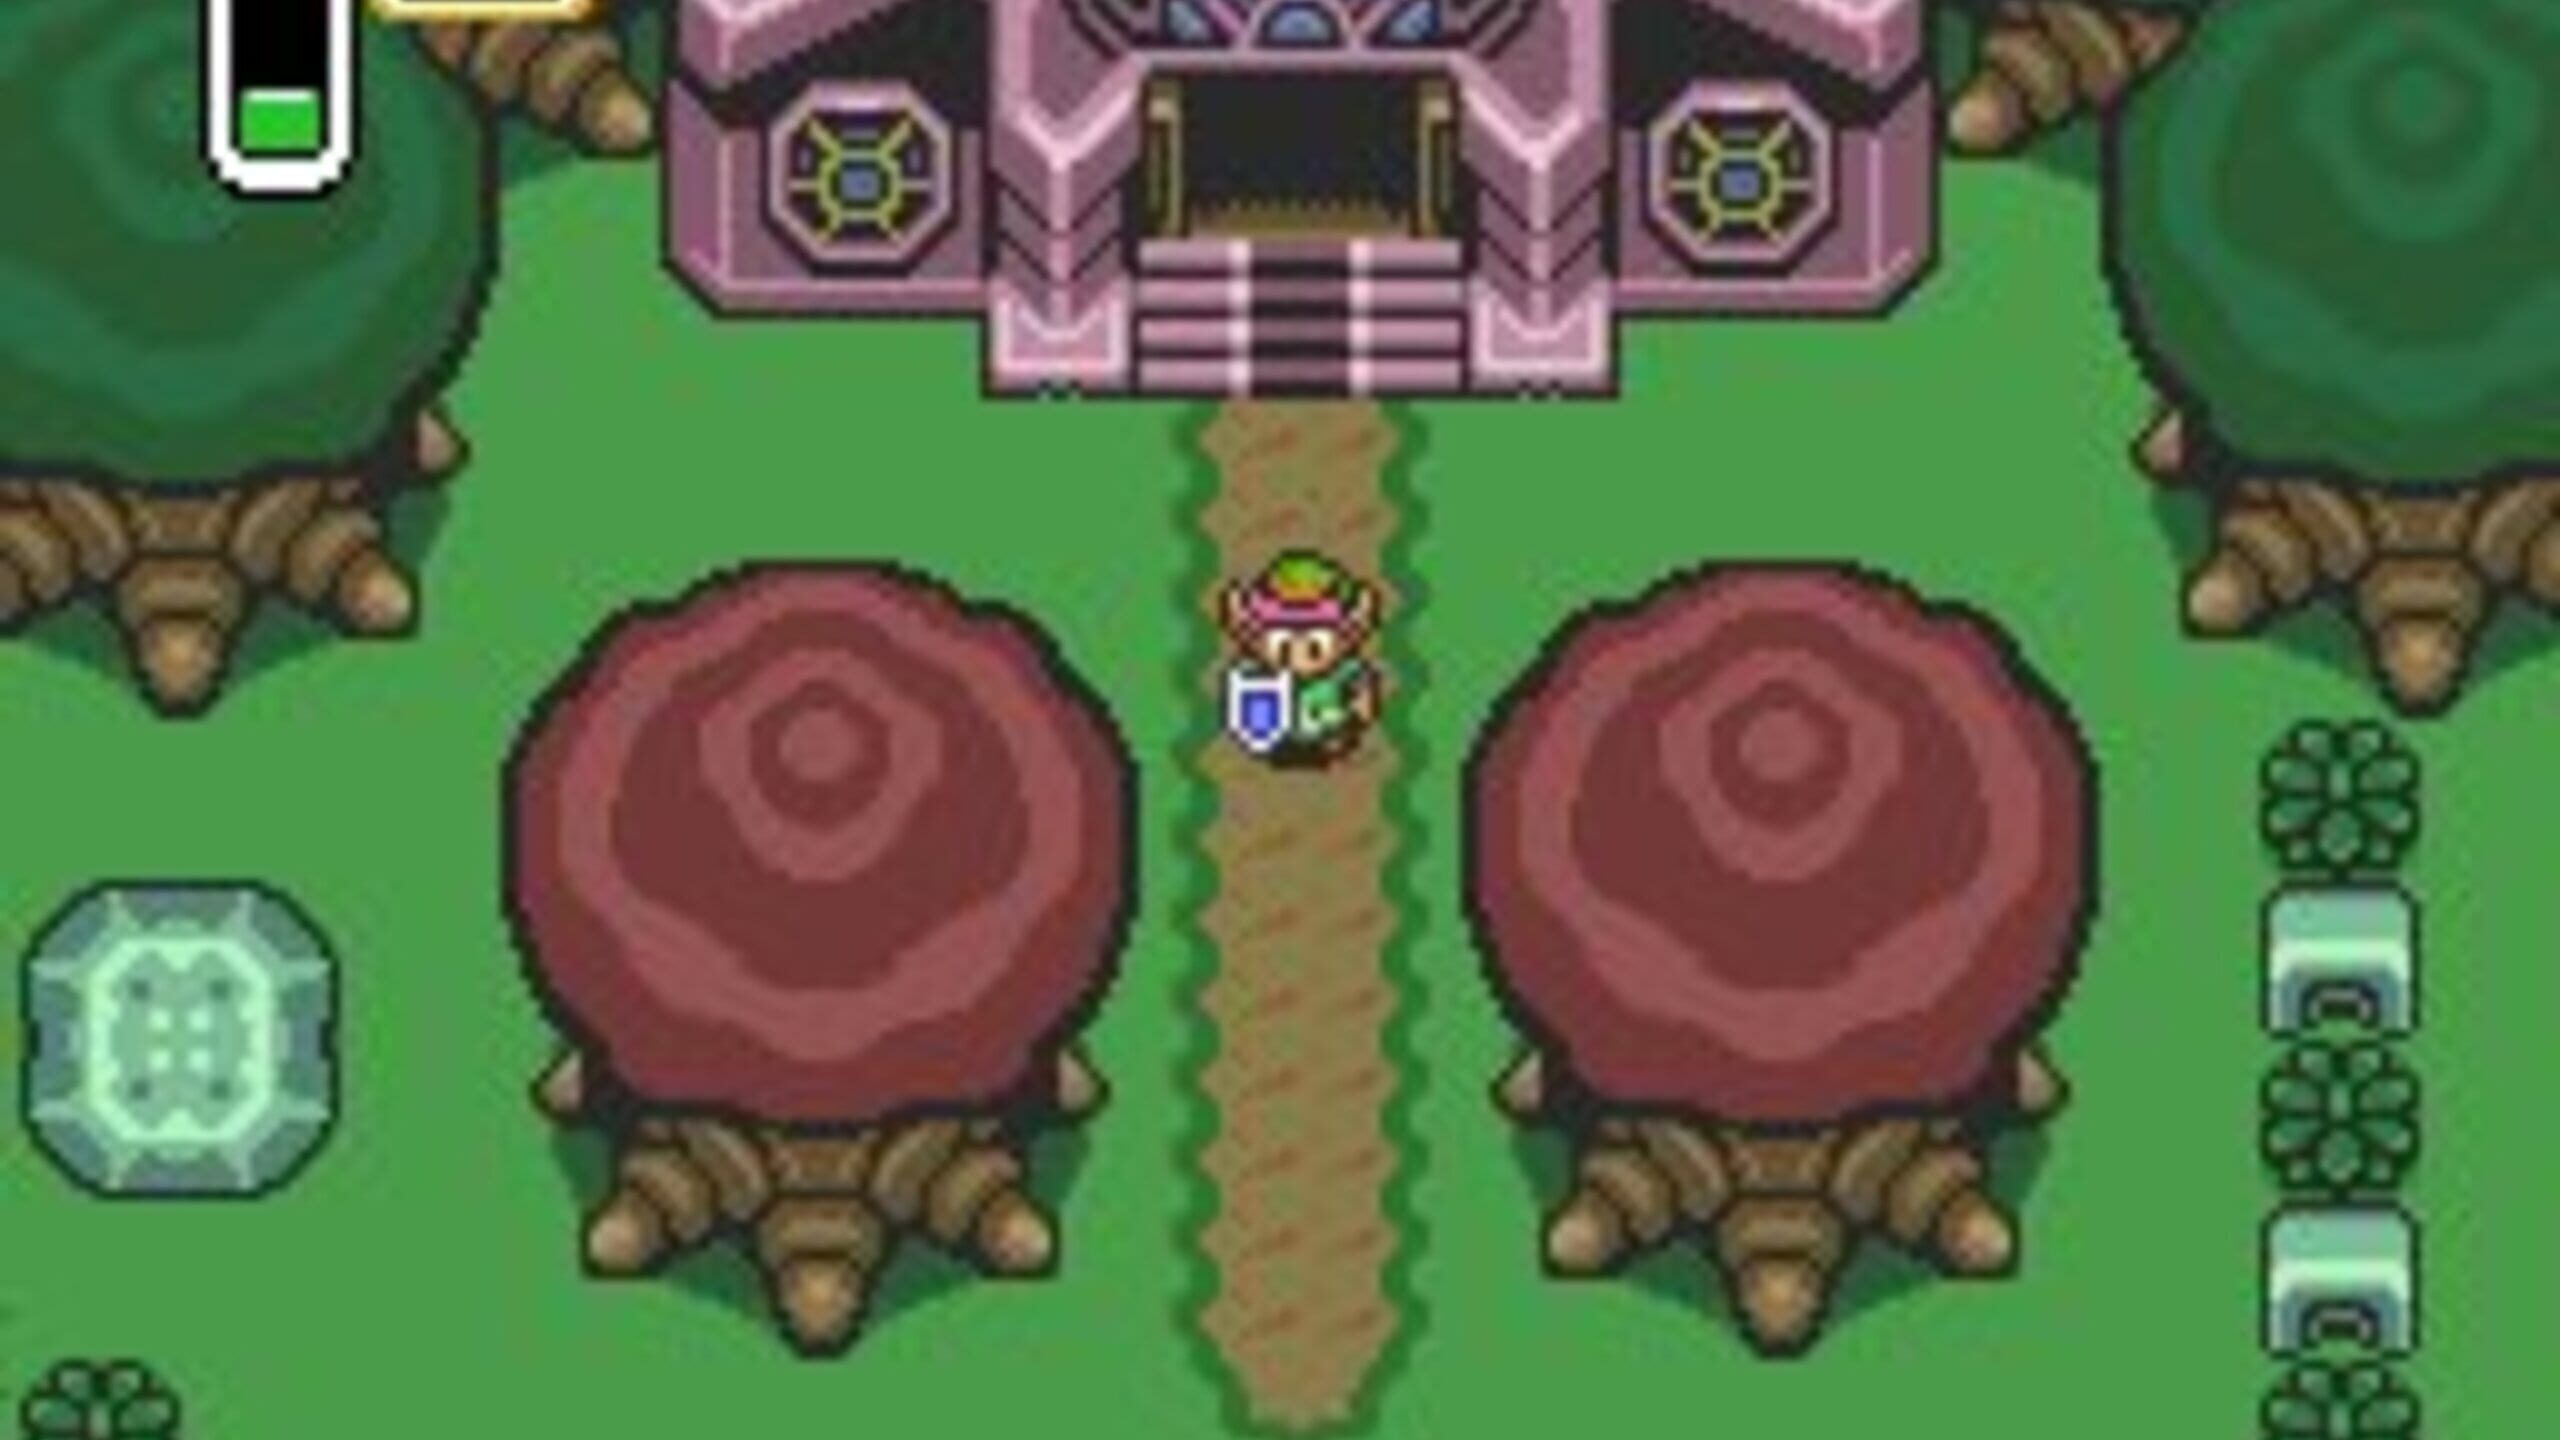 Screenshot do game The Legend of Zelda: A Link to the Past